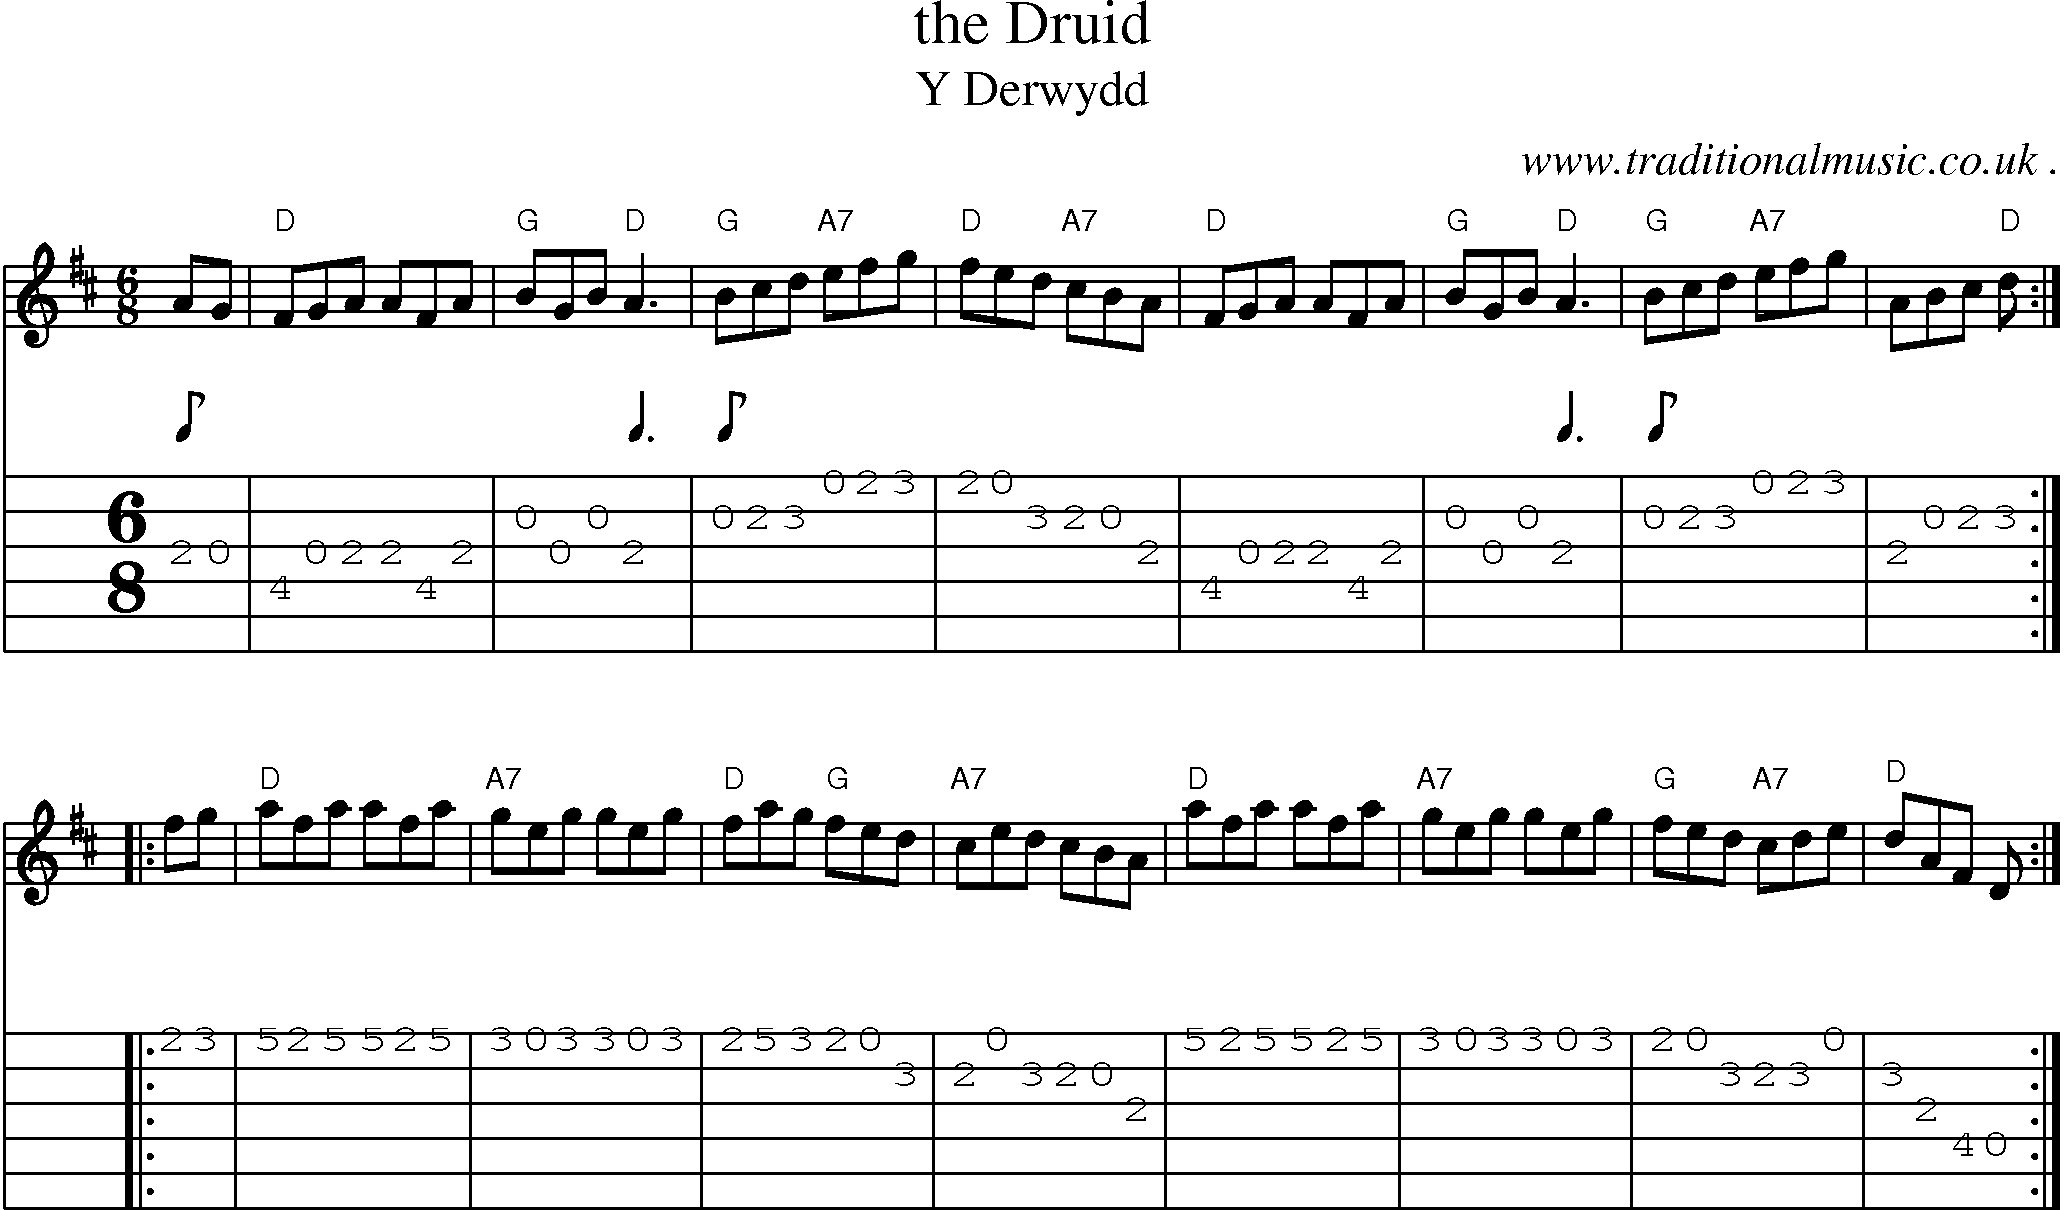 Sheet-music  score, Chords and Guitar Tabs for The Druid